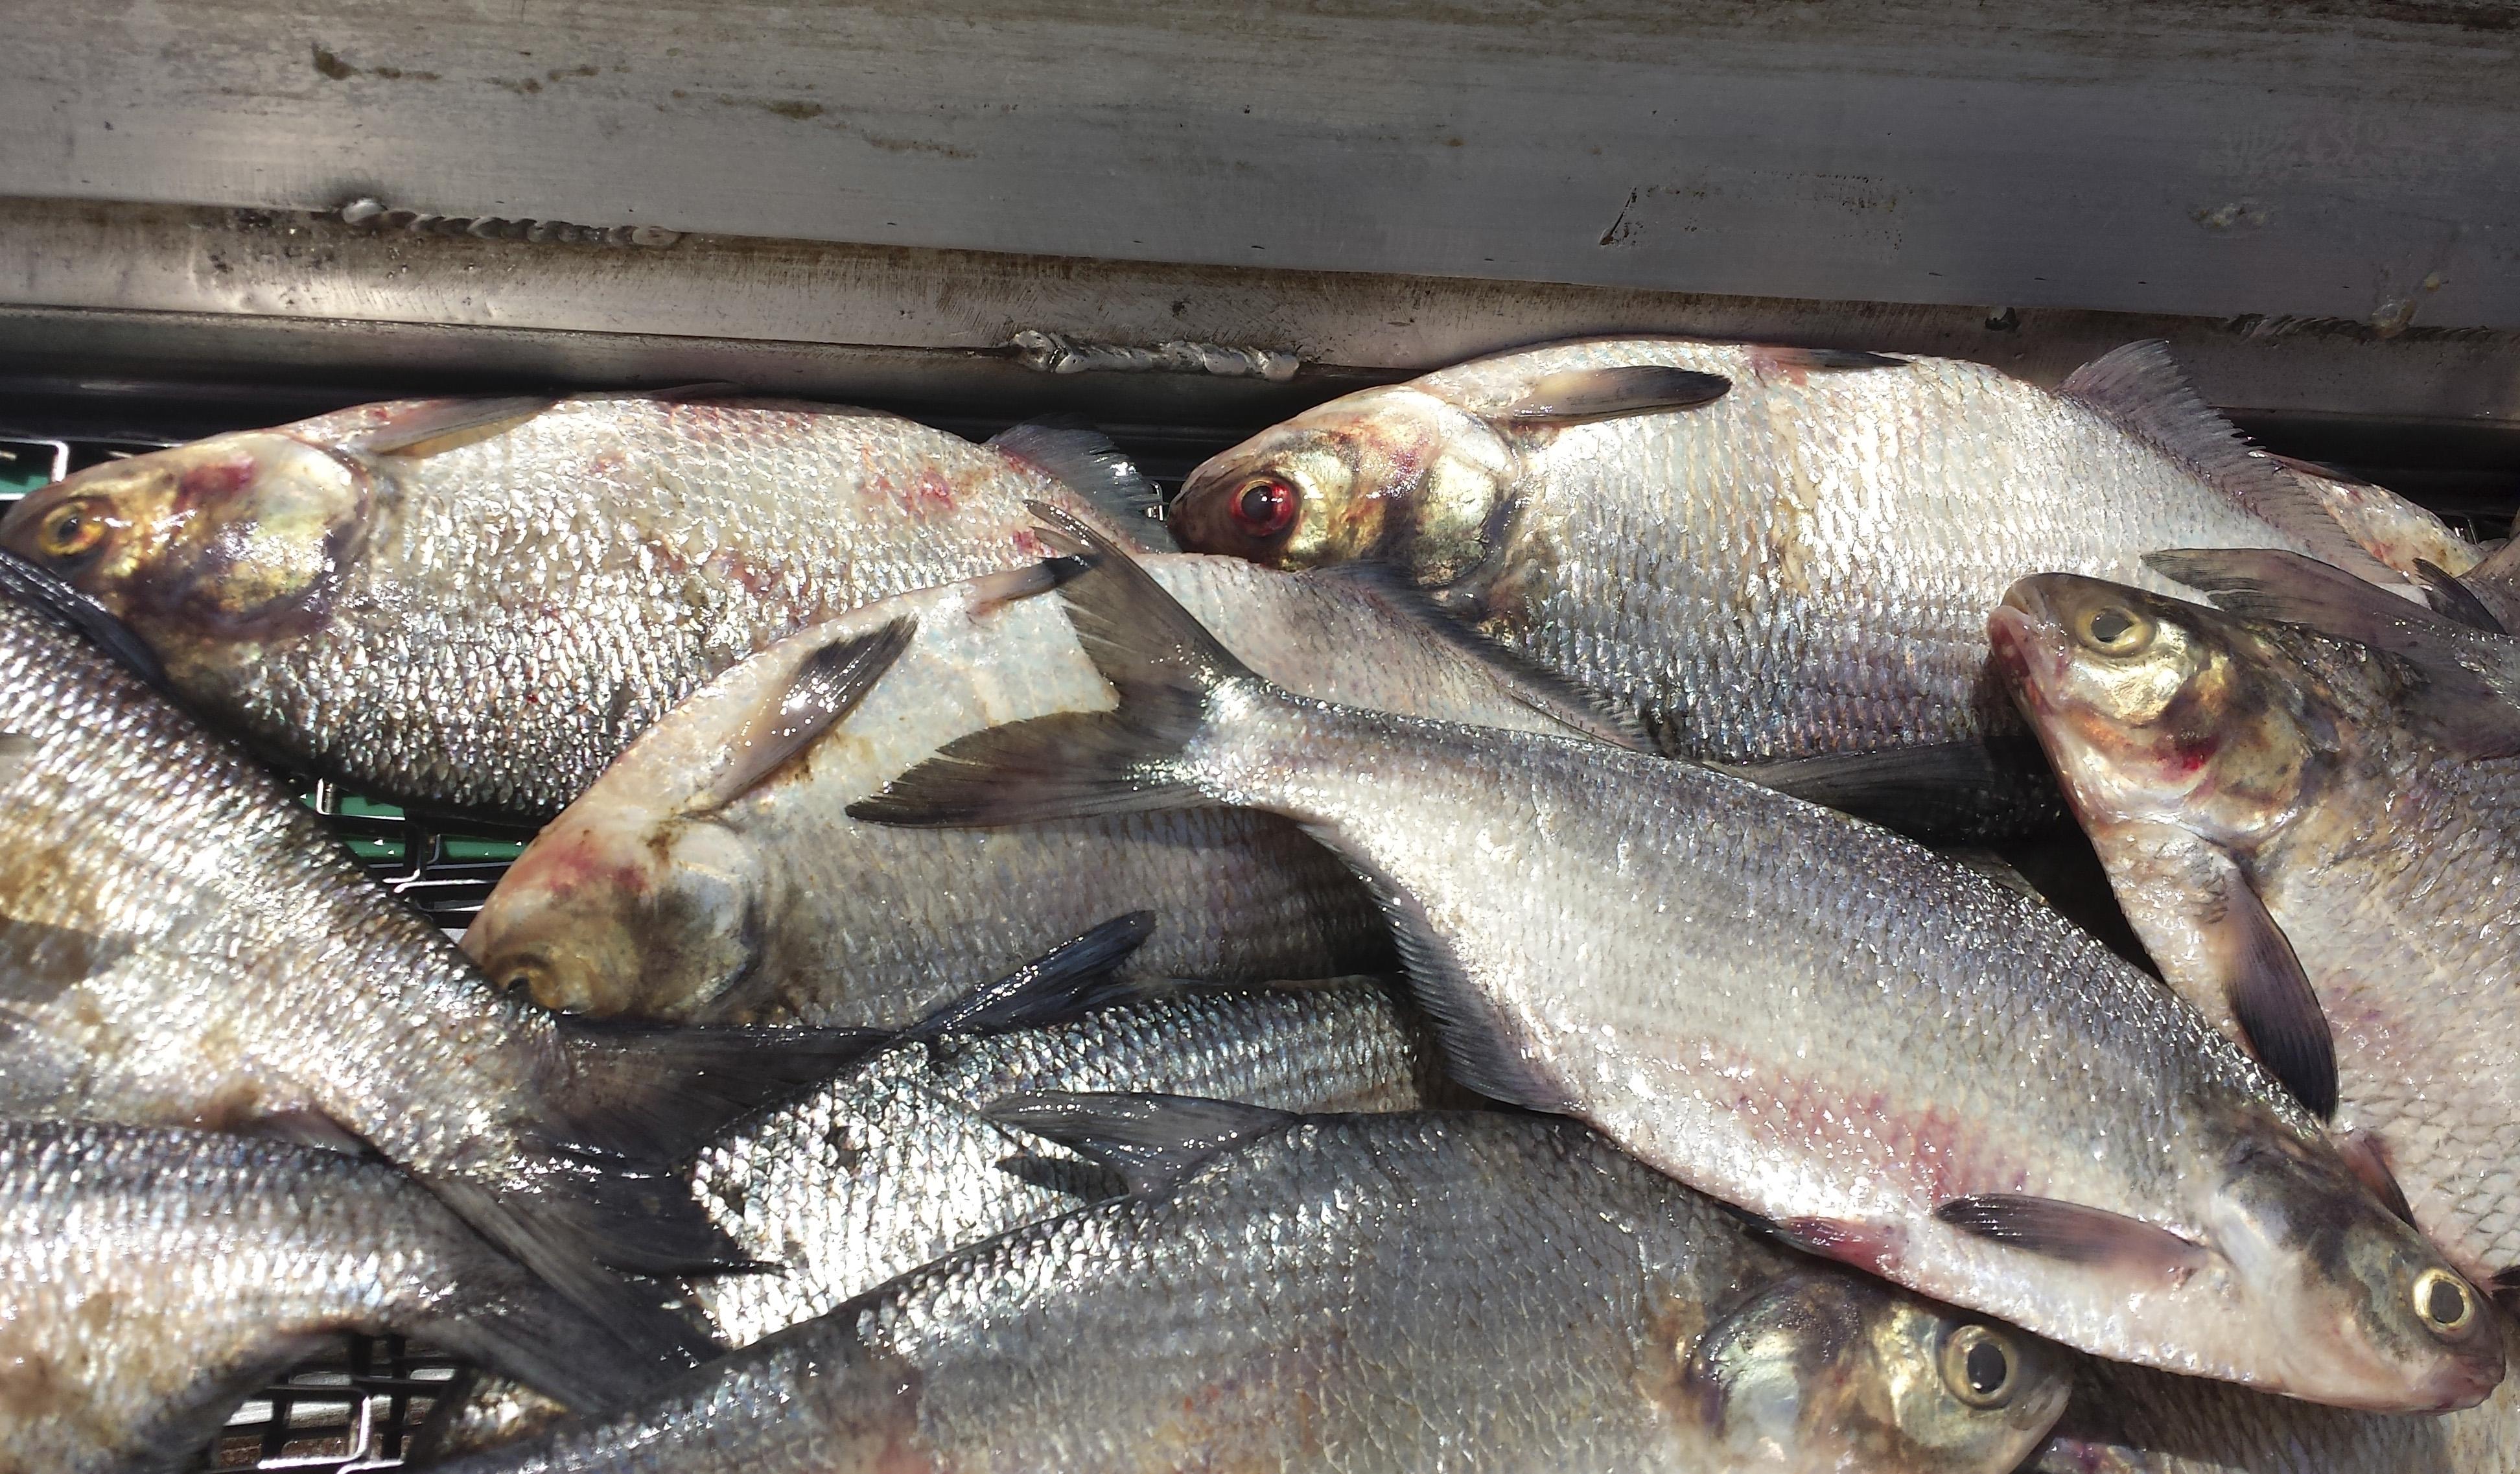 Lake George gizzard shad harvest aims to help clean up lake